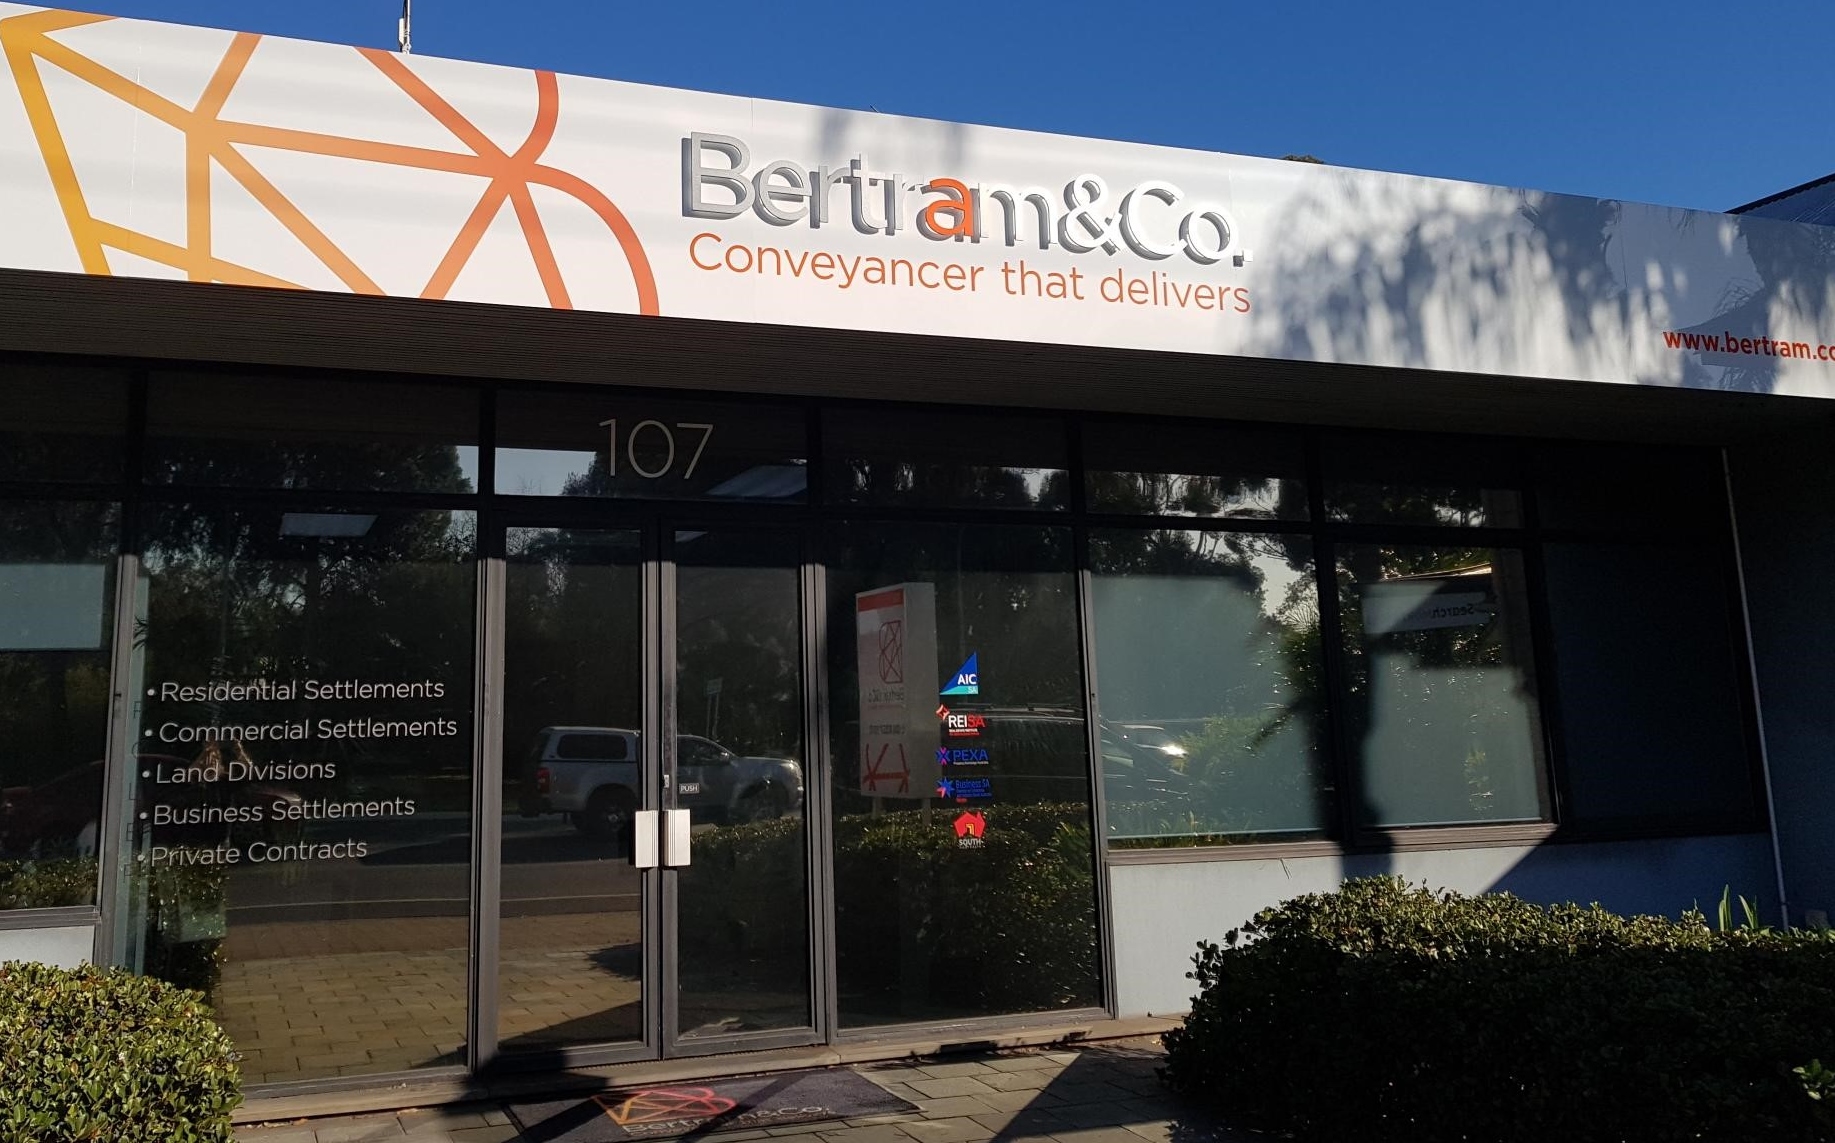 Images Bertram And Co